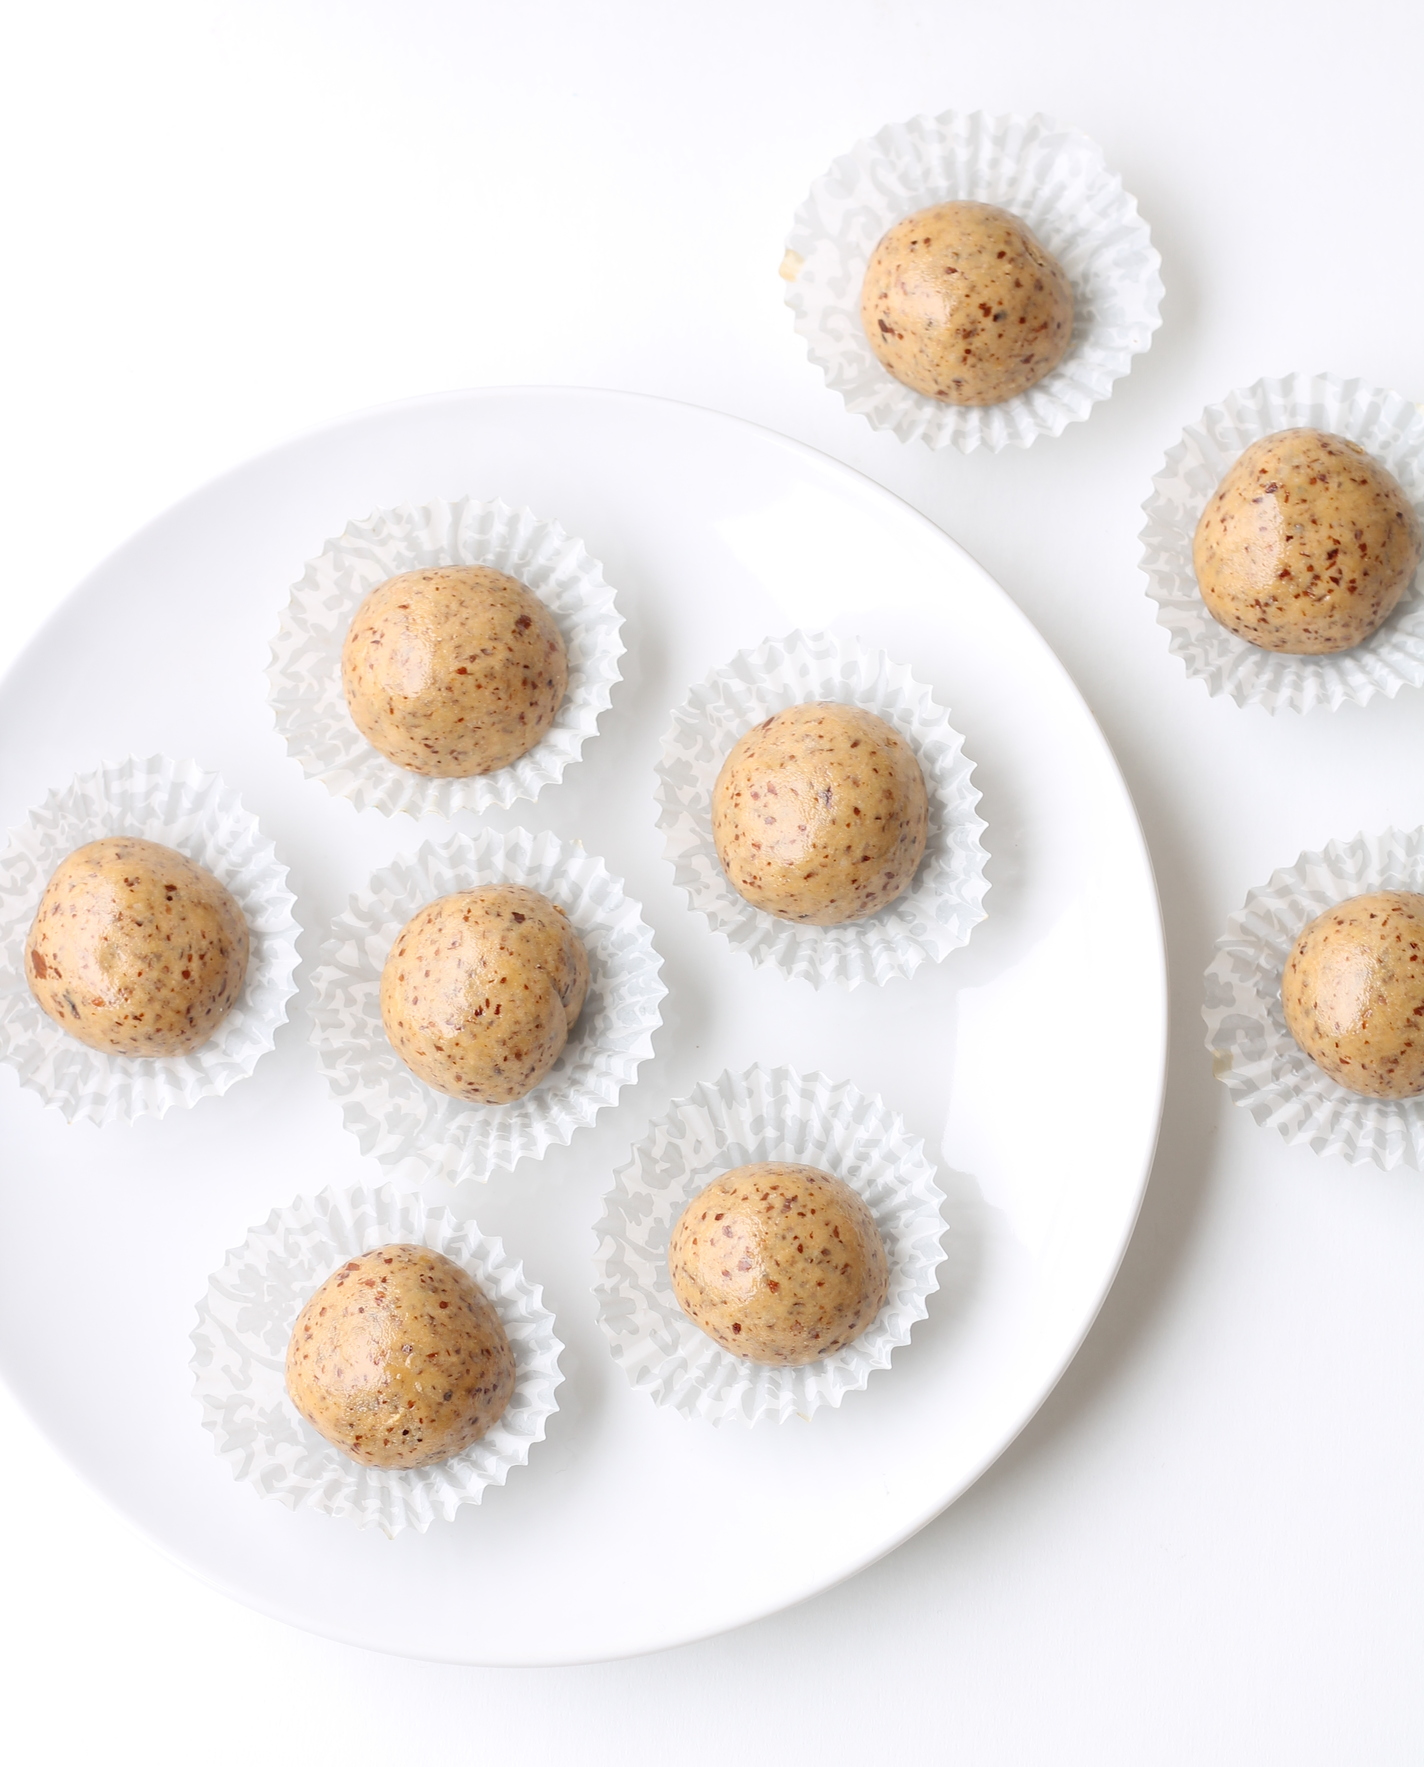 Vegan, Gluten-Free "3 Ingredient Protein Bites" are perfect for snacks/dessert! Made in just one bowl and requires 10 minutes of less of your time.